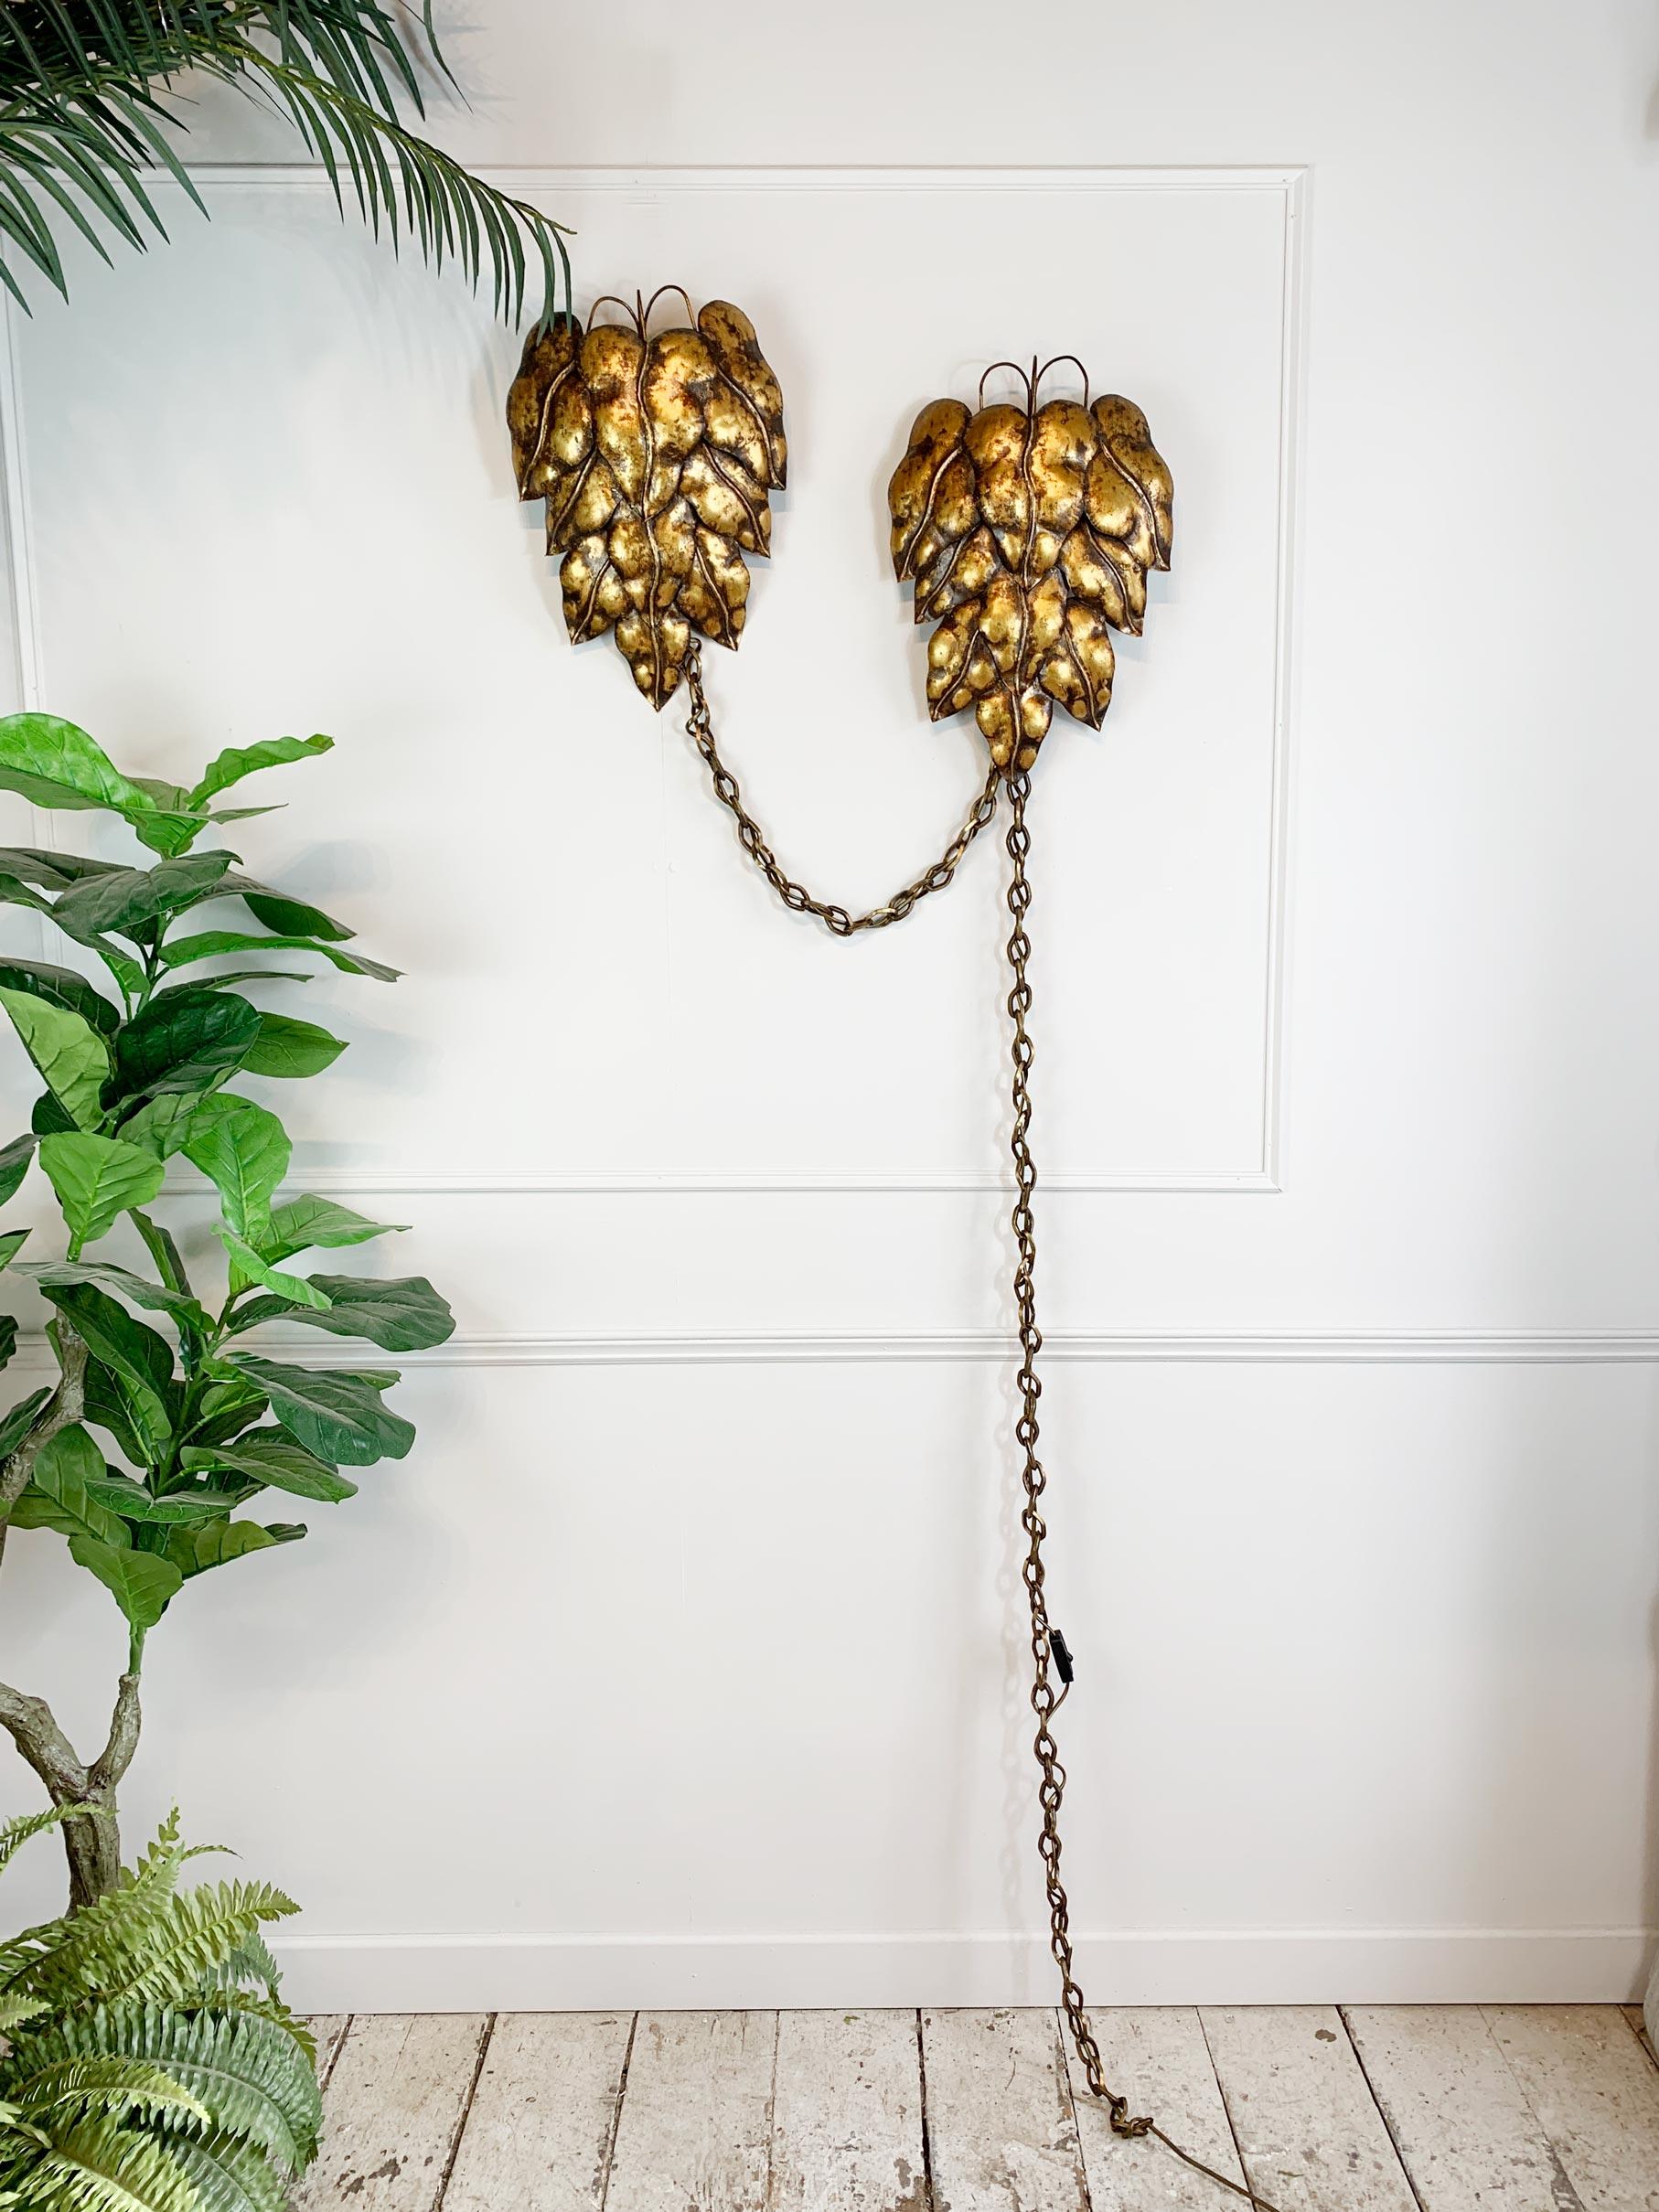 Pair of Gold Italian Leaf and Chain Swag Wall Lights, 1950's For Sale 2